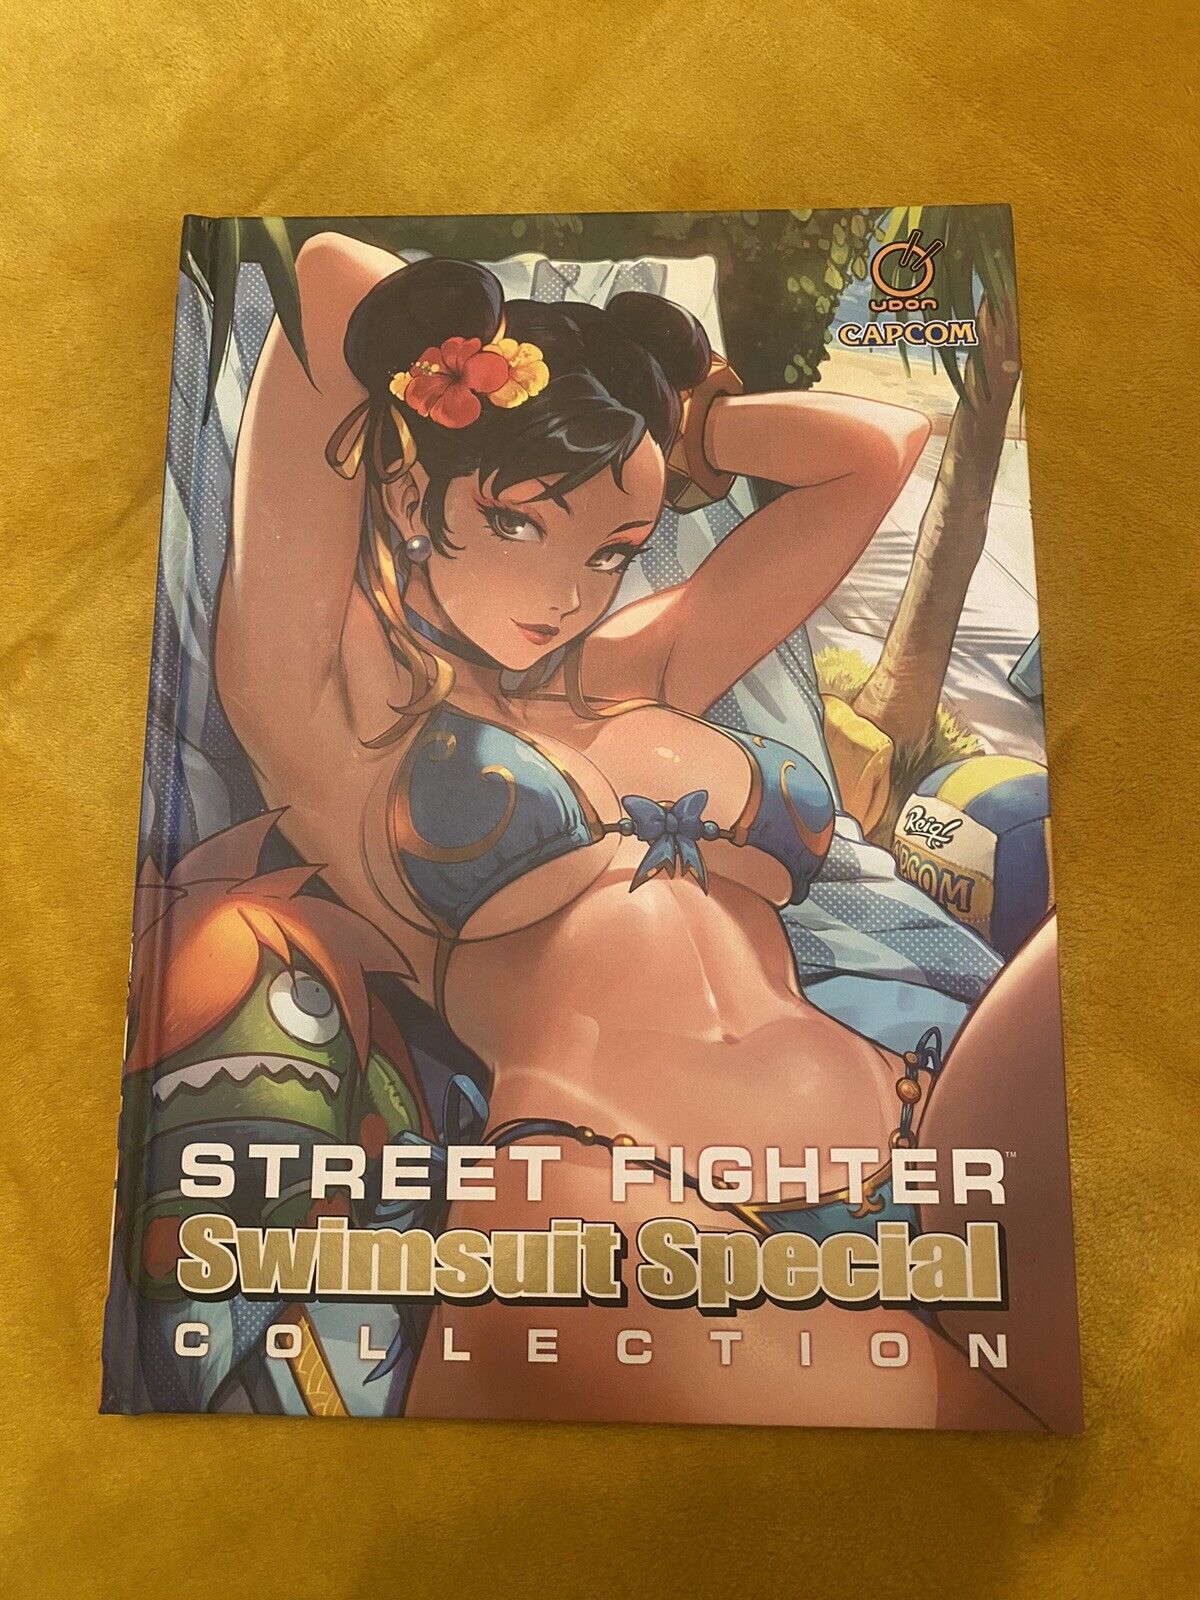 Street Fighter Swimsuit Special Volume 1 Hardcover - Gold Foil Exclusive Artbook